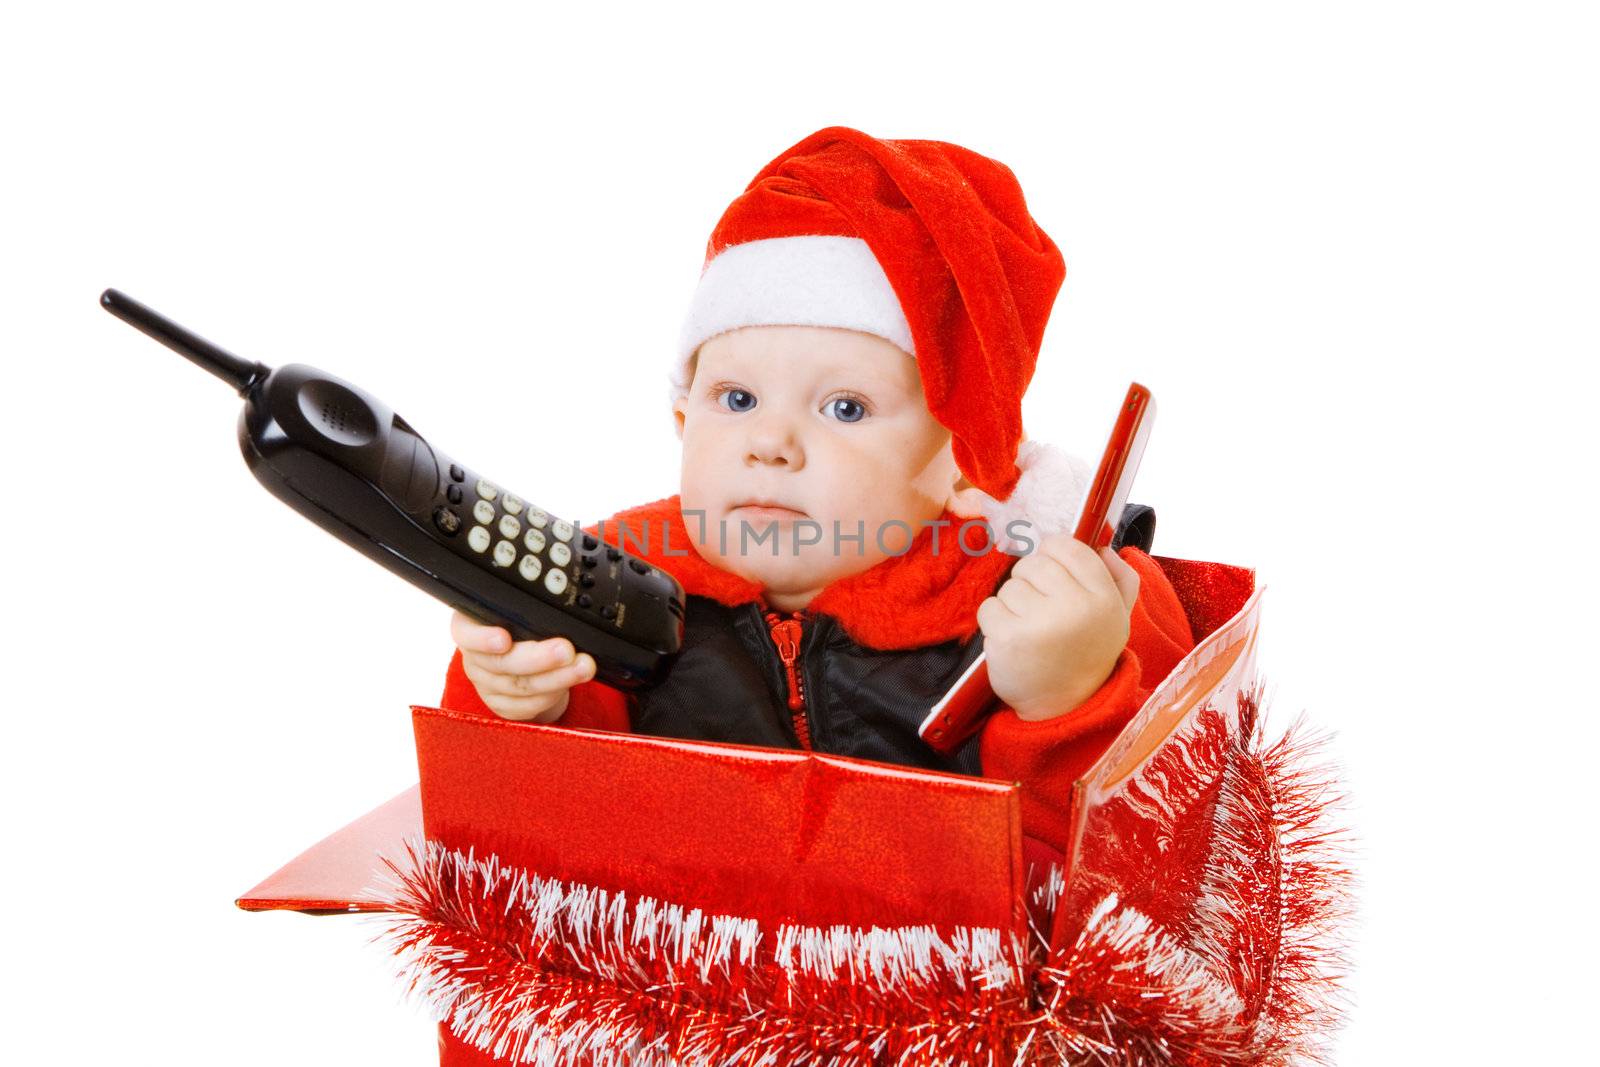 infant calling by phone in the christmas box by vsurkov